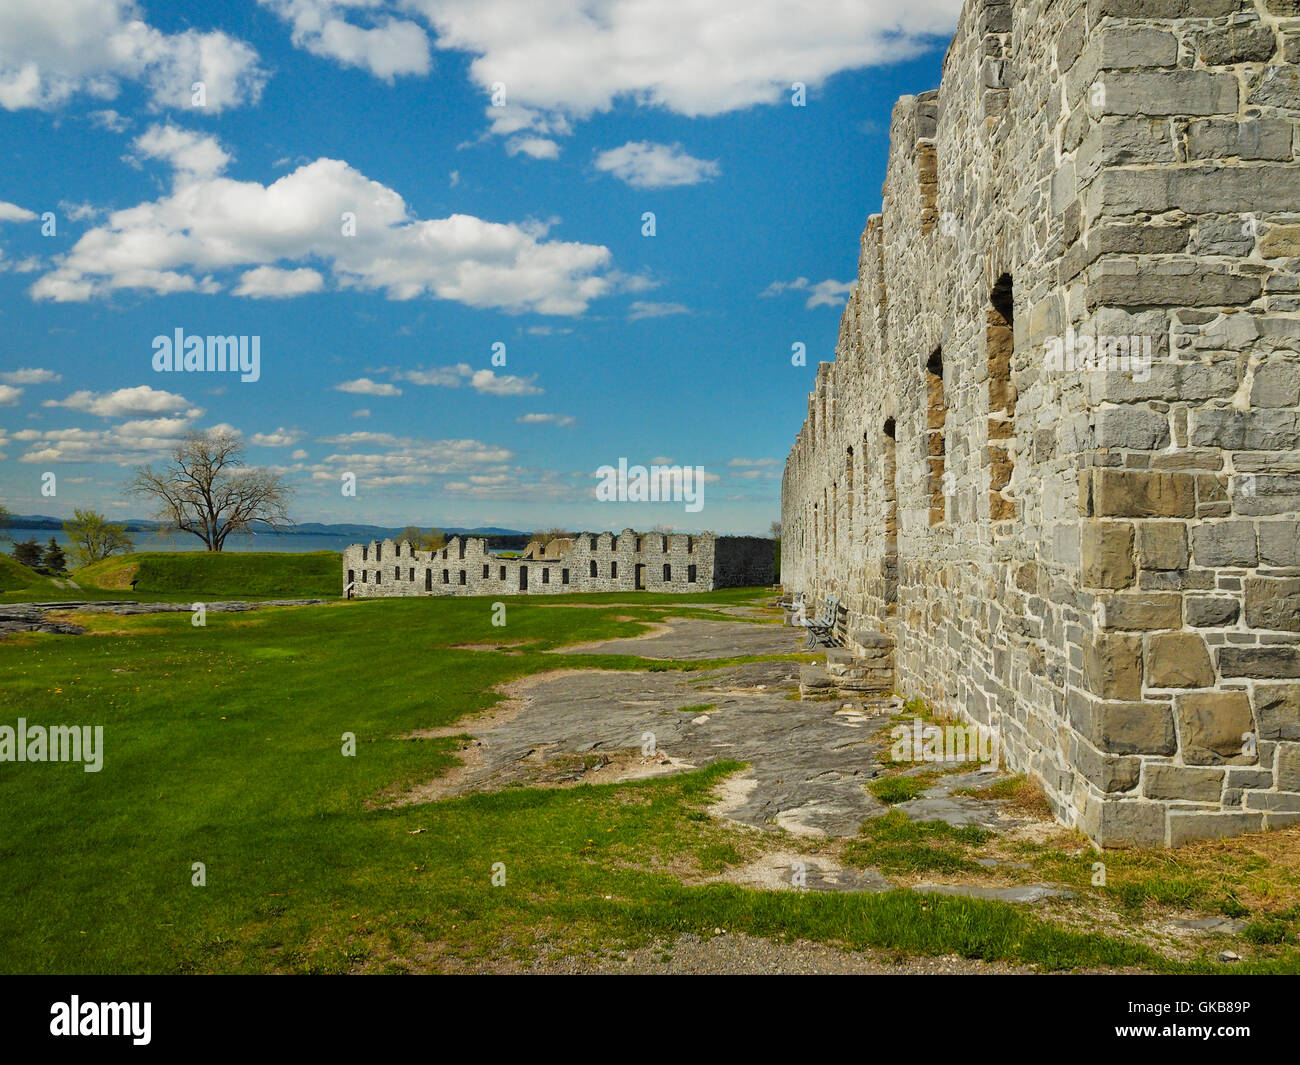 Crown Point State Park, Crown Point, New York, USA Stockfoto